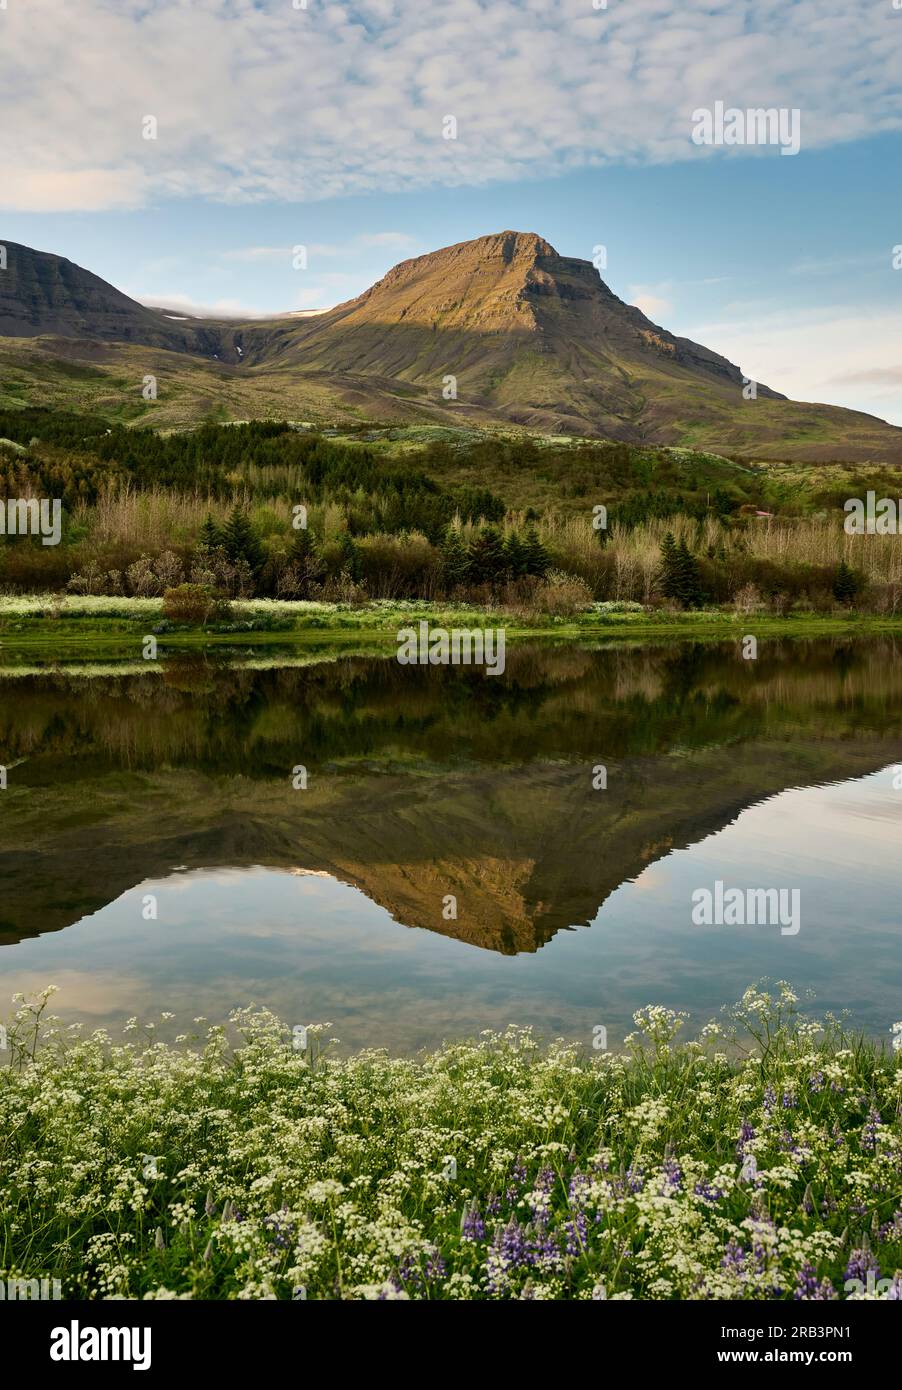 Calm lake surrounded by mountains and flowers Stock Photo